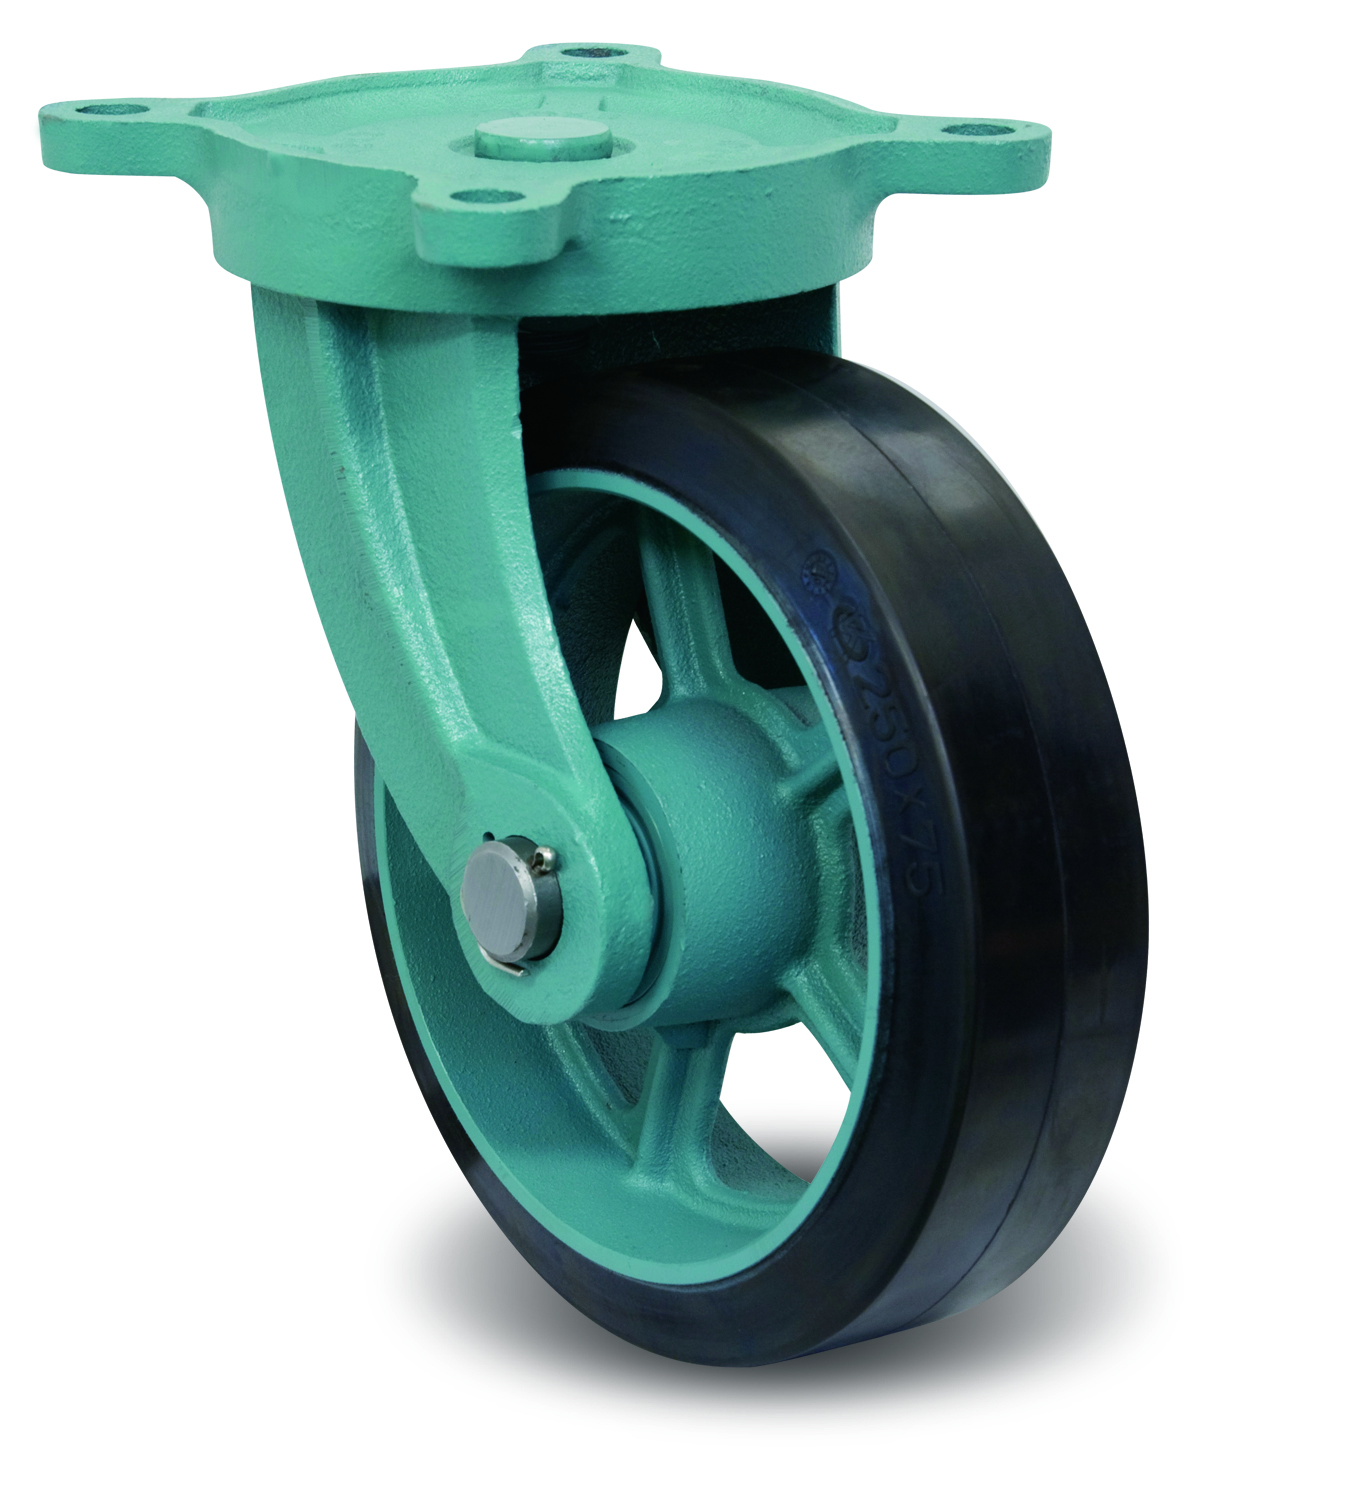 Casters - Rubber with Ductile Steel Swivel Plate, MG-O Series with Bracket, E/MG-O Series. EMG-O130X50